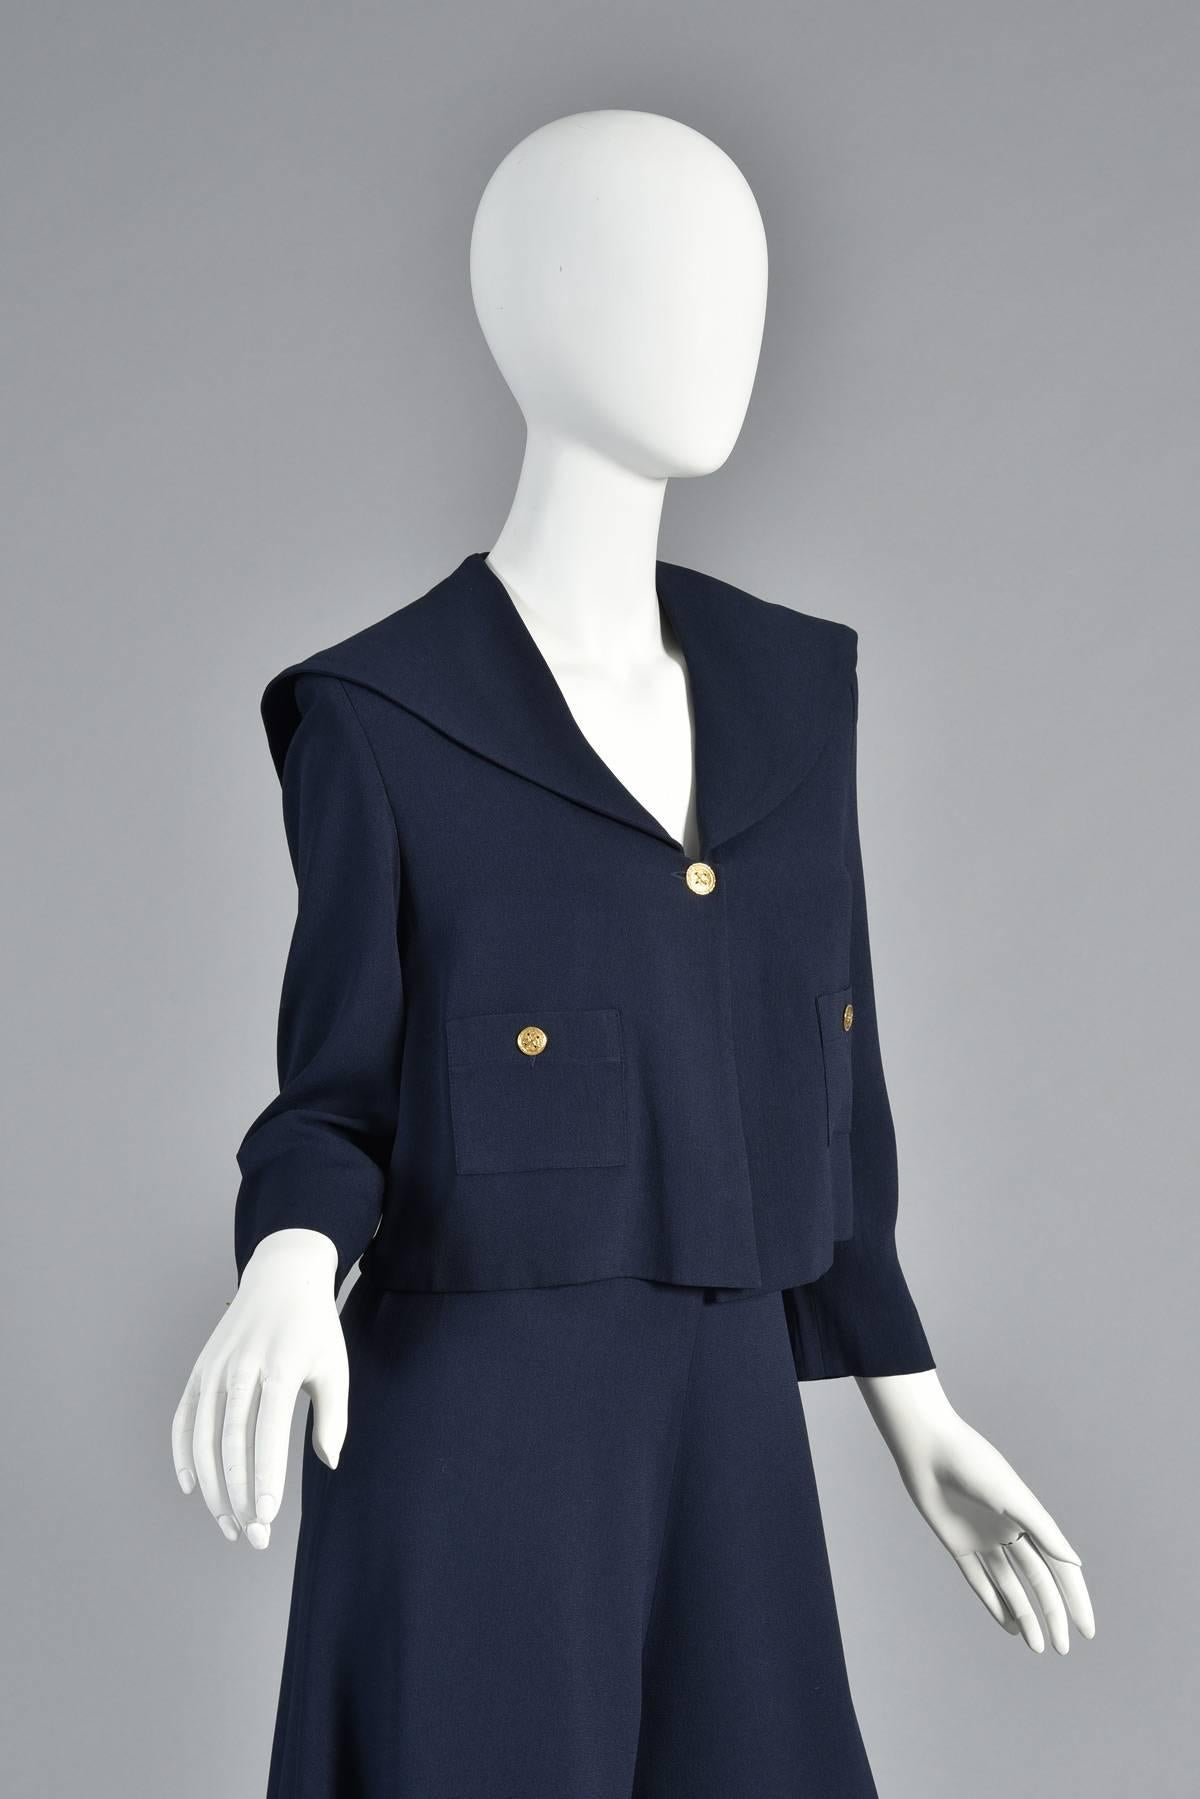 Sonia Rykiel Sailor Inspired Gaucho Pant Suit For Sale 2